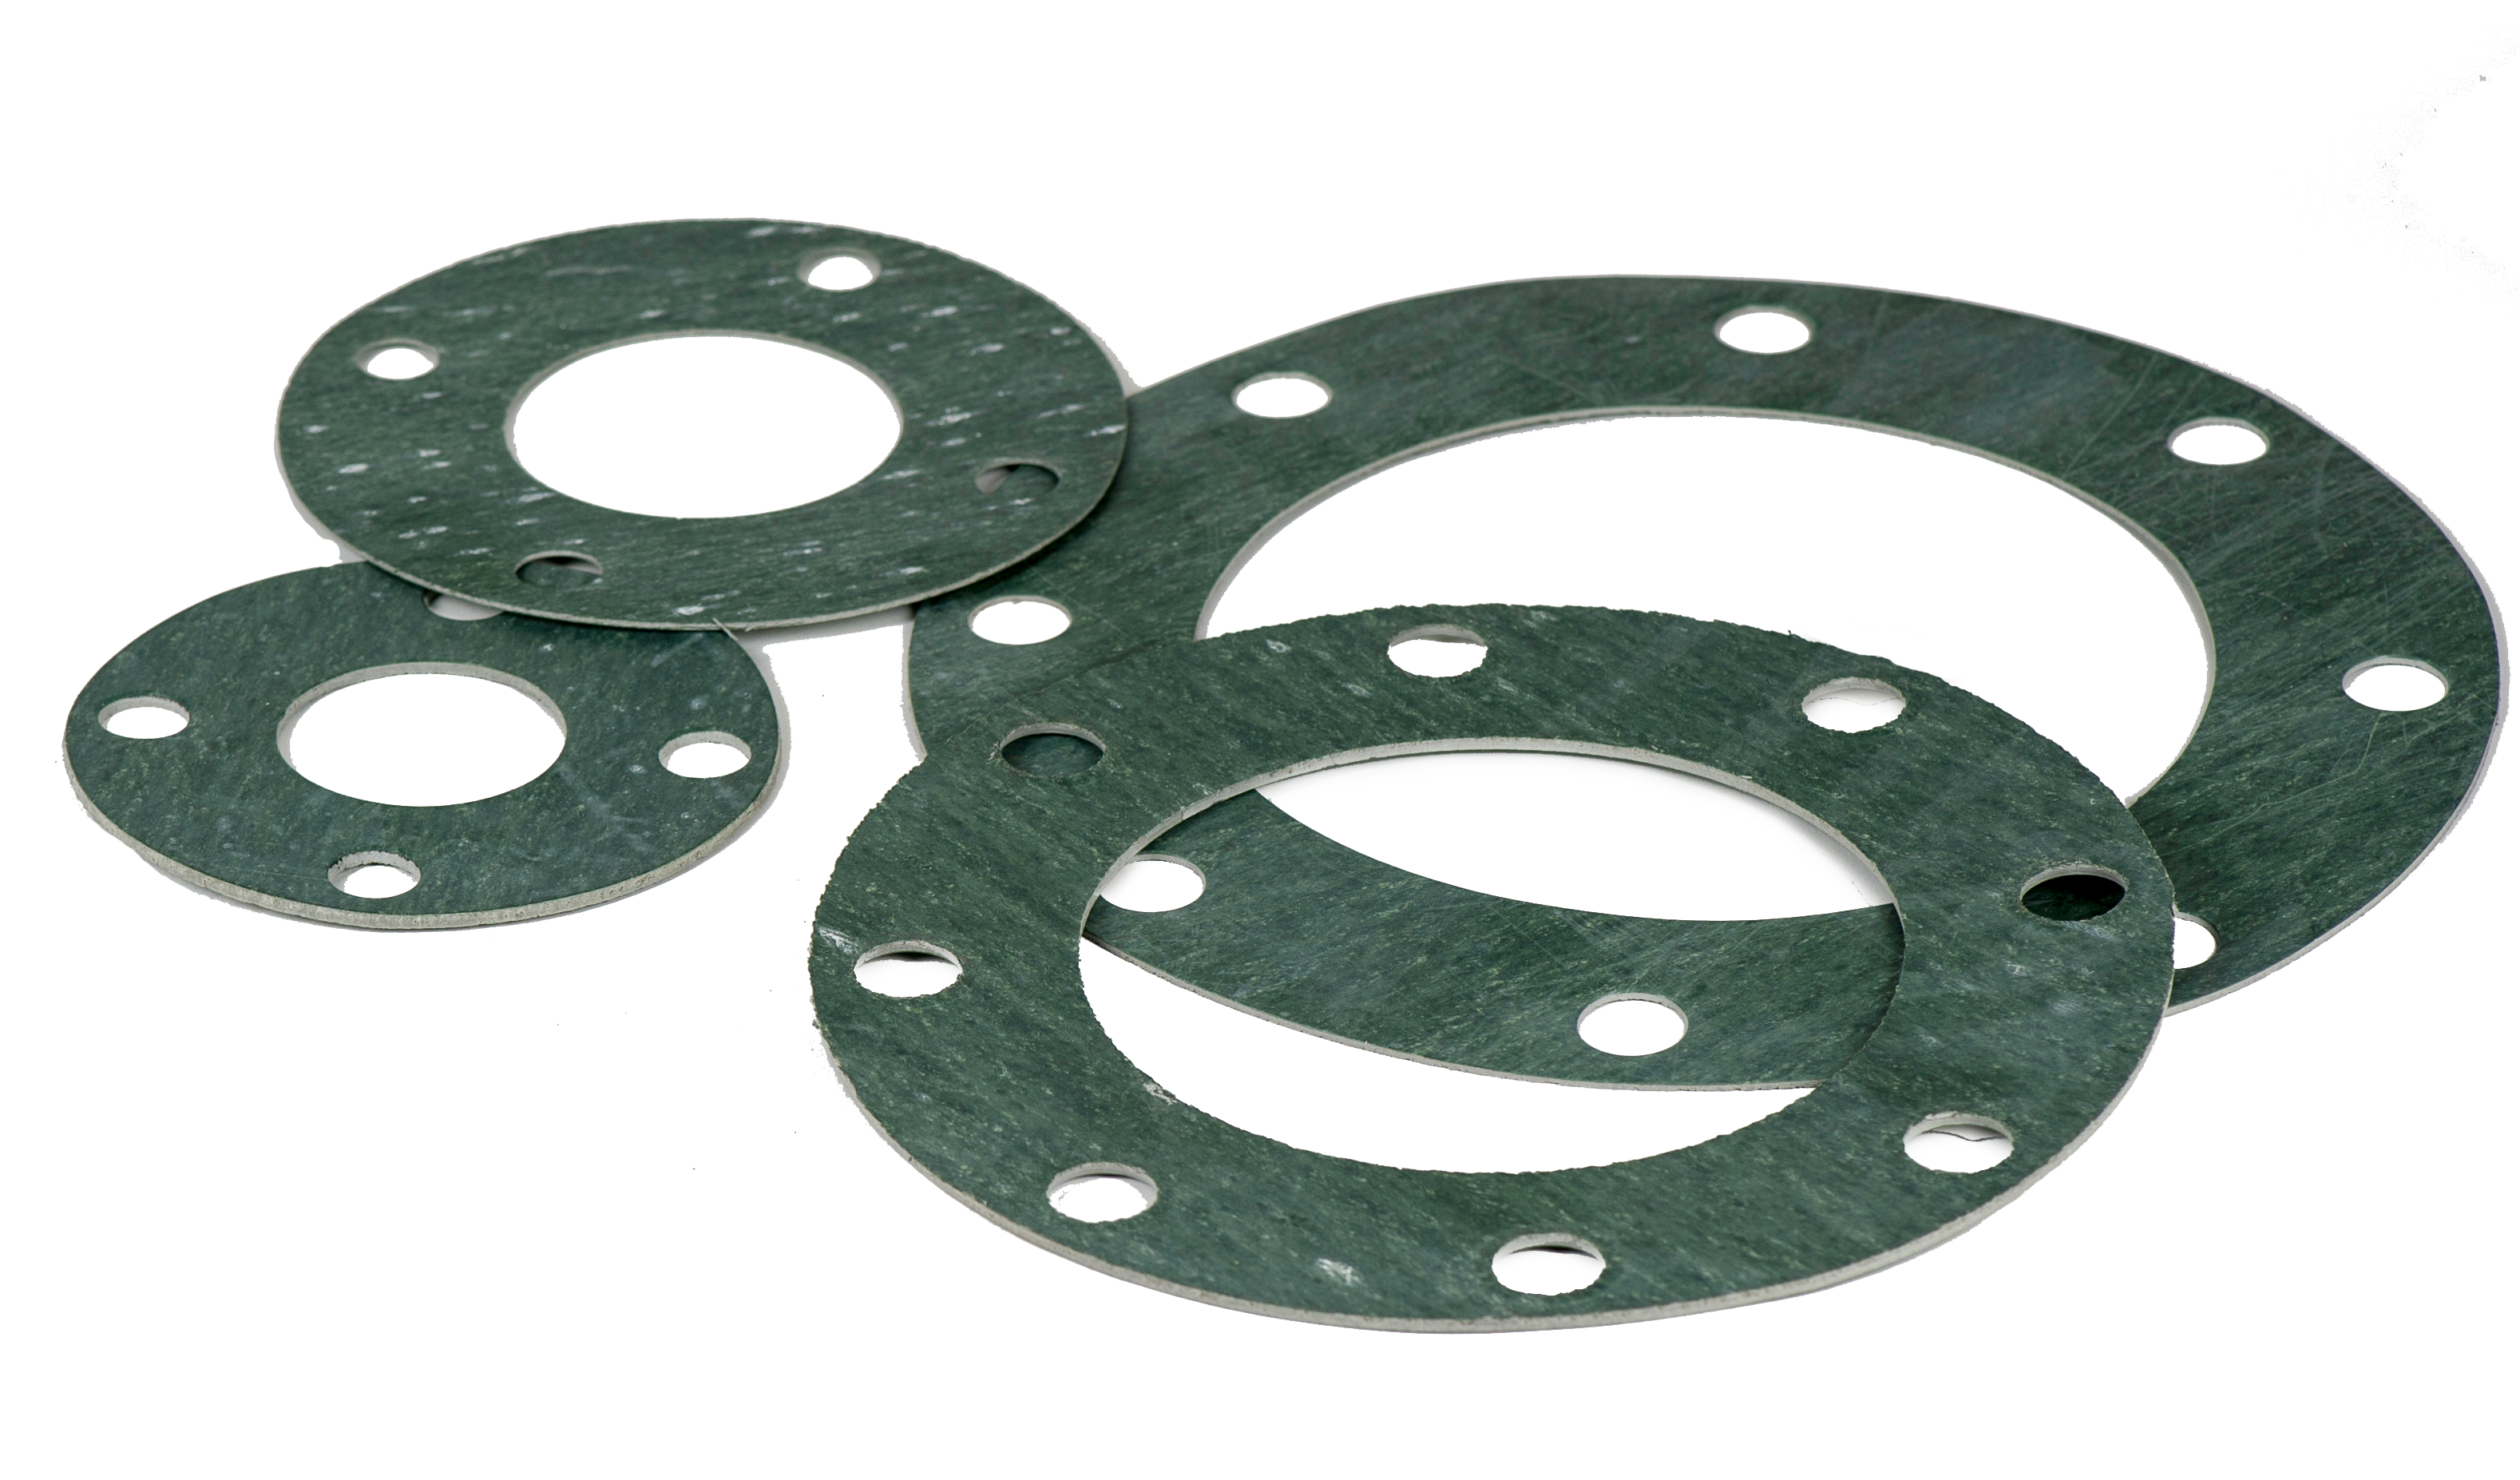 Sterling Seal CFF7106.500.062.300X10 7106 60 Durometer Full Face Gasket 0.84 ID Pack of 10 Neoprene Rubber 1/16 Thick 1/2 Pipe Size Pressure Class 300# 